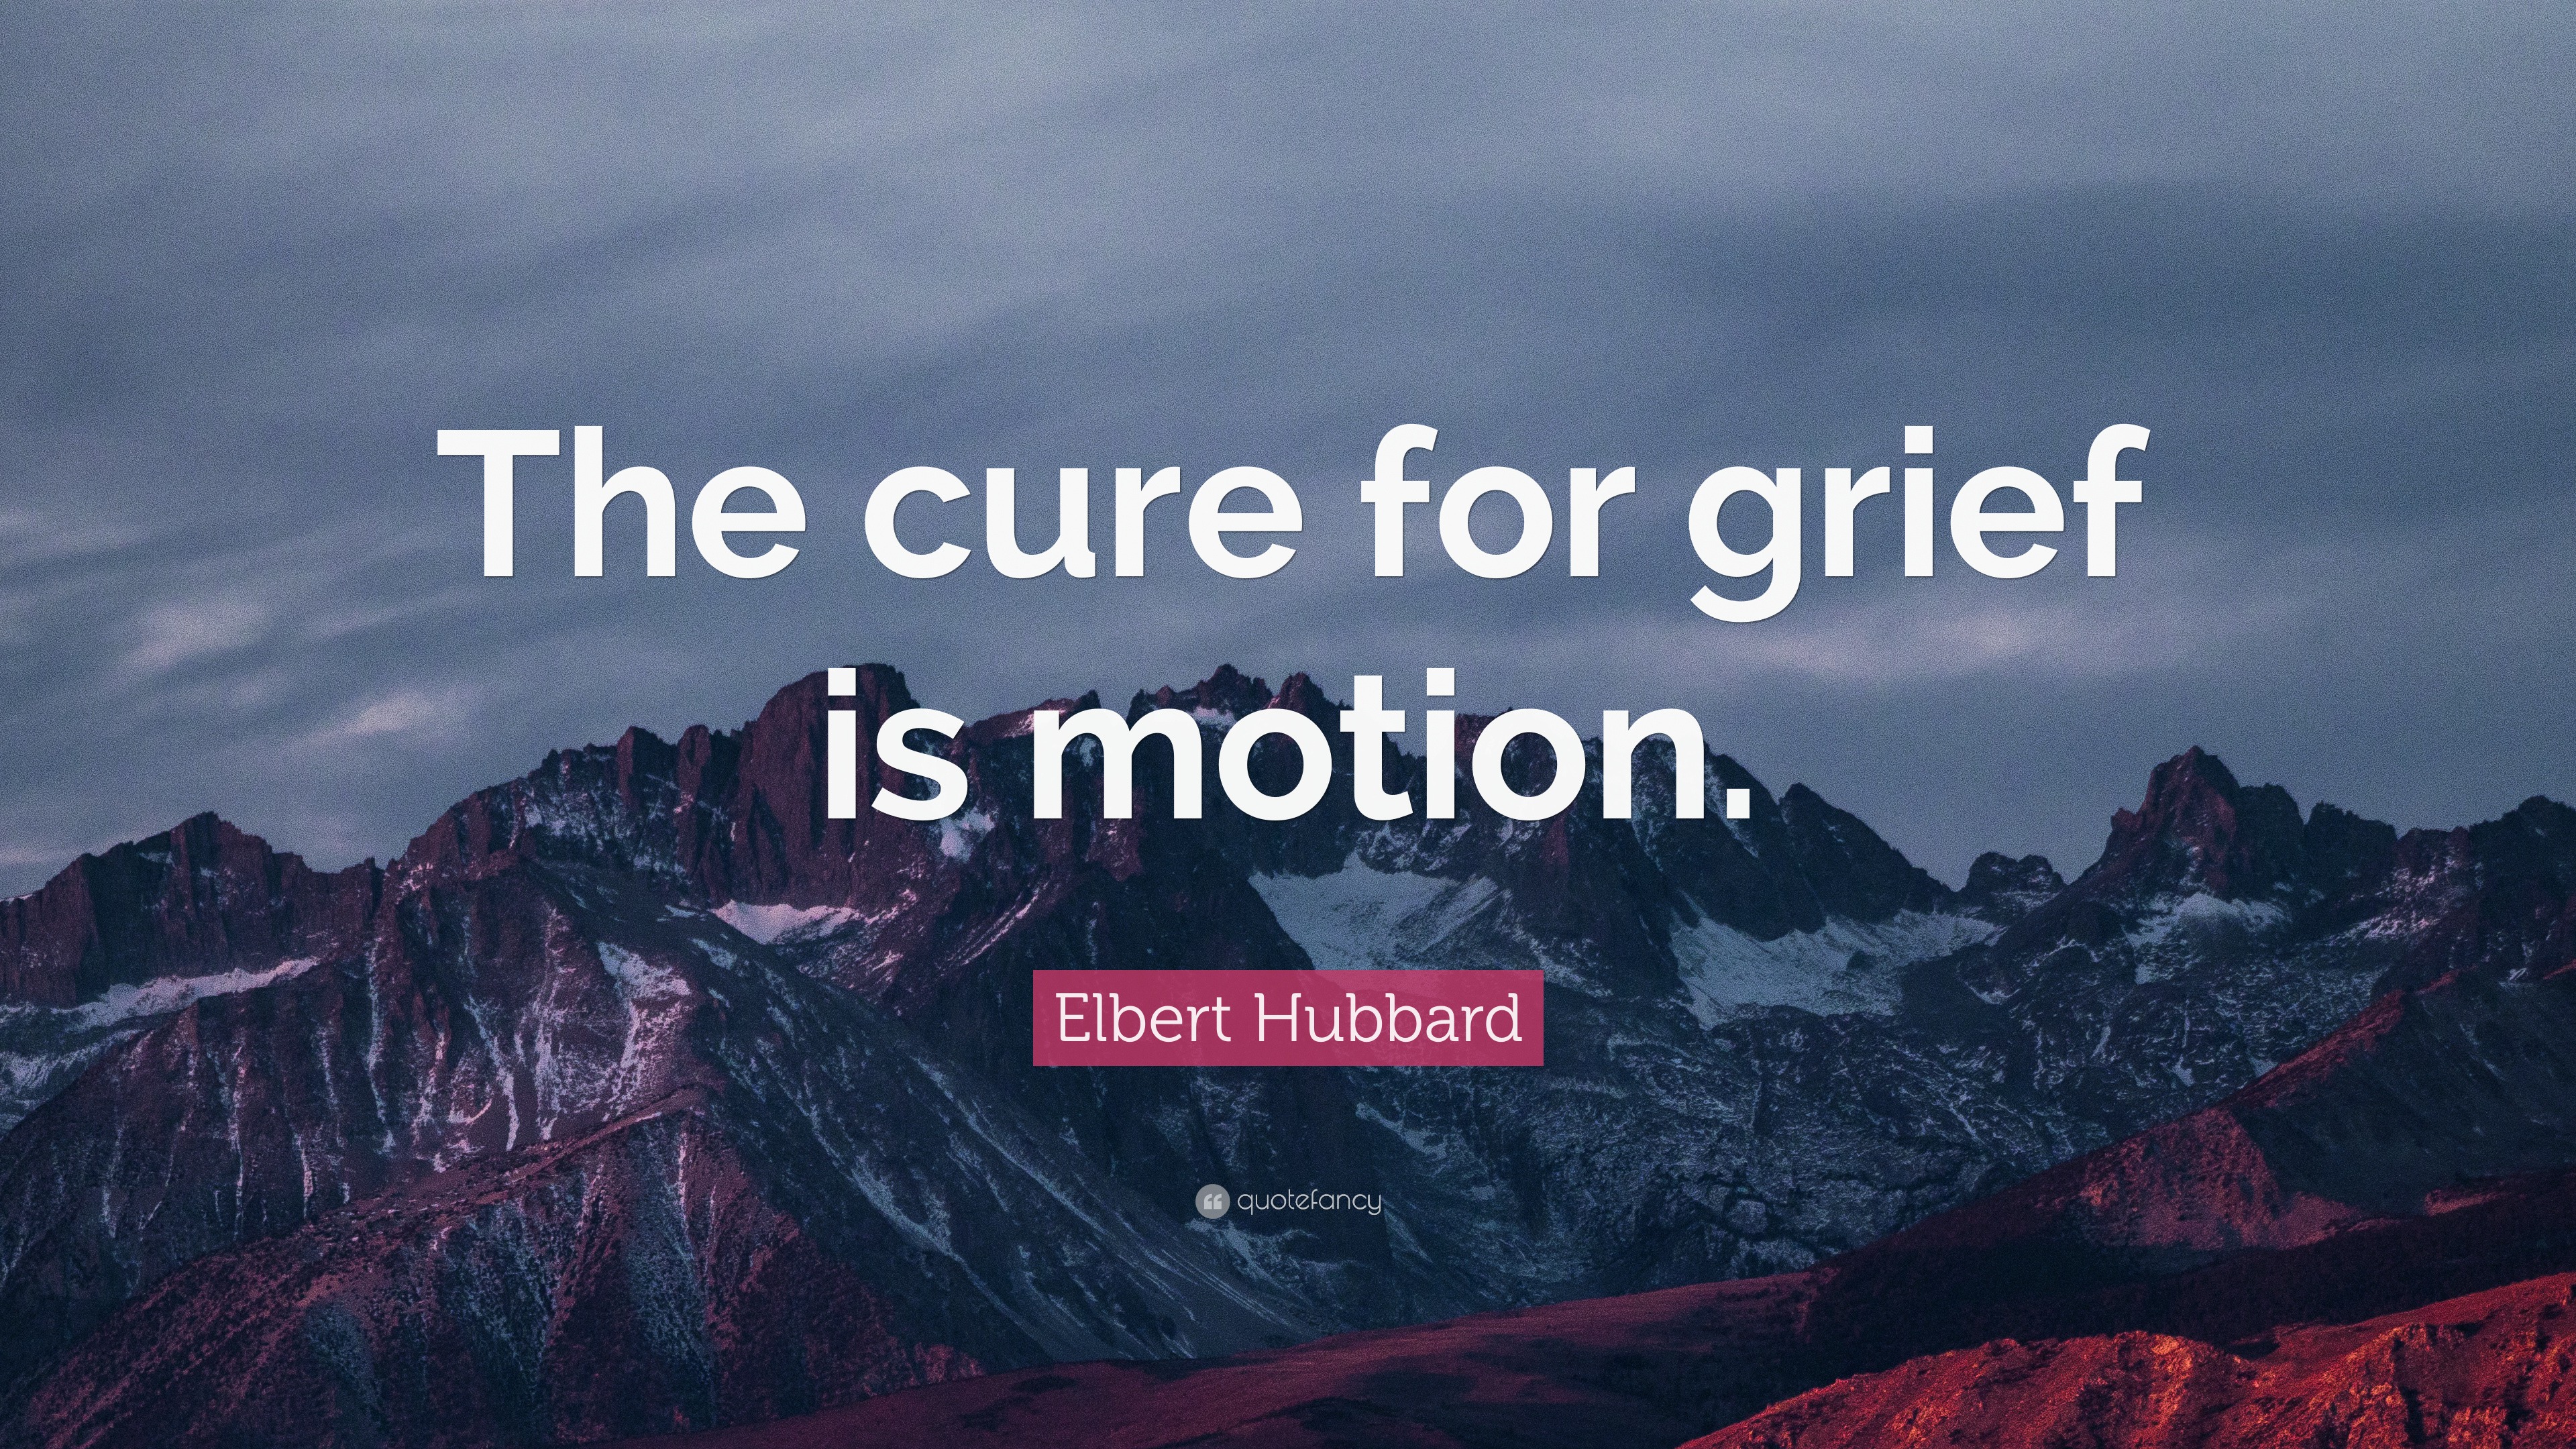 Elbert Hubbard Quote: “The cure for grief is motion.”